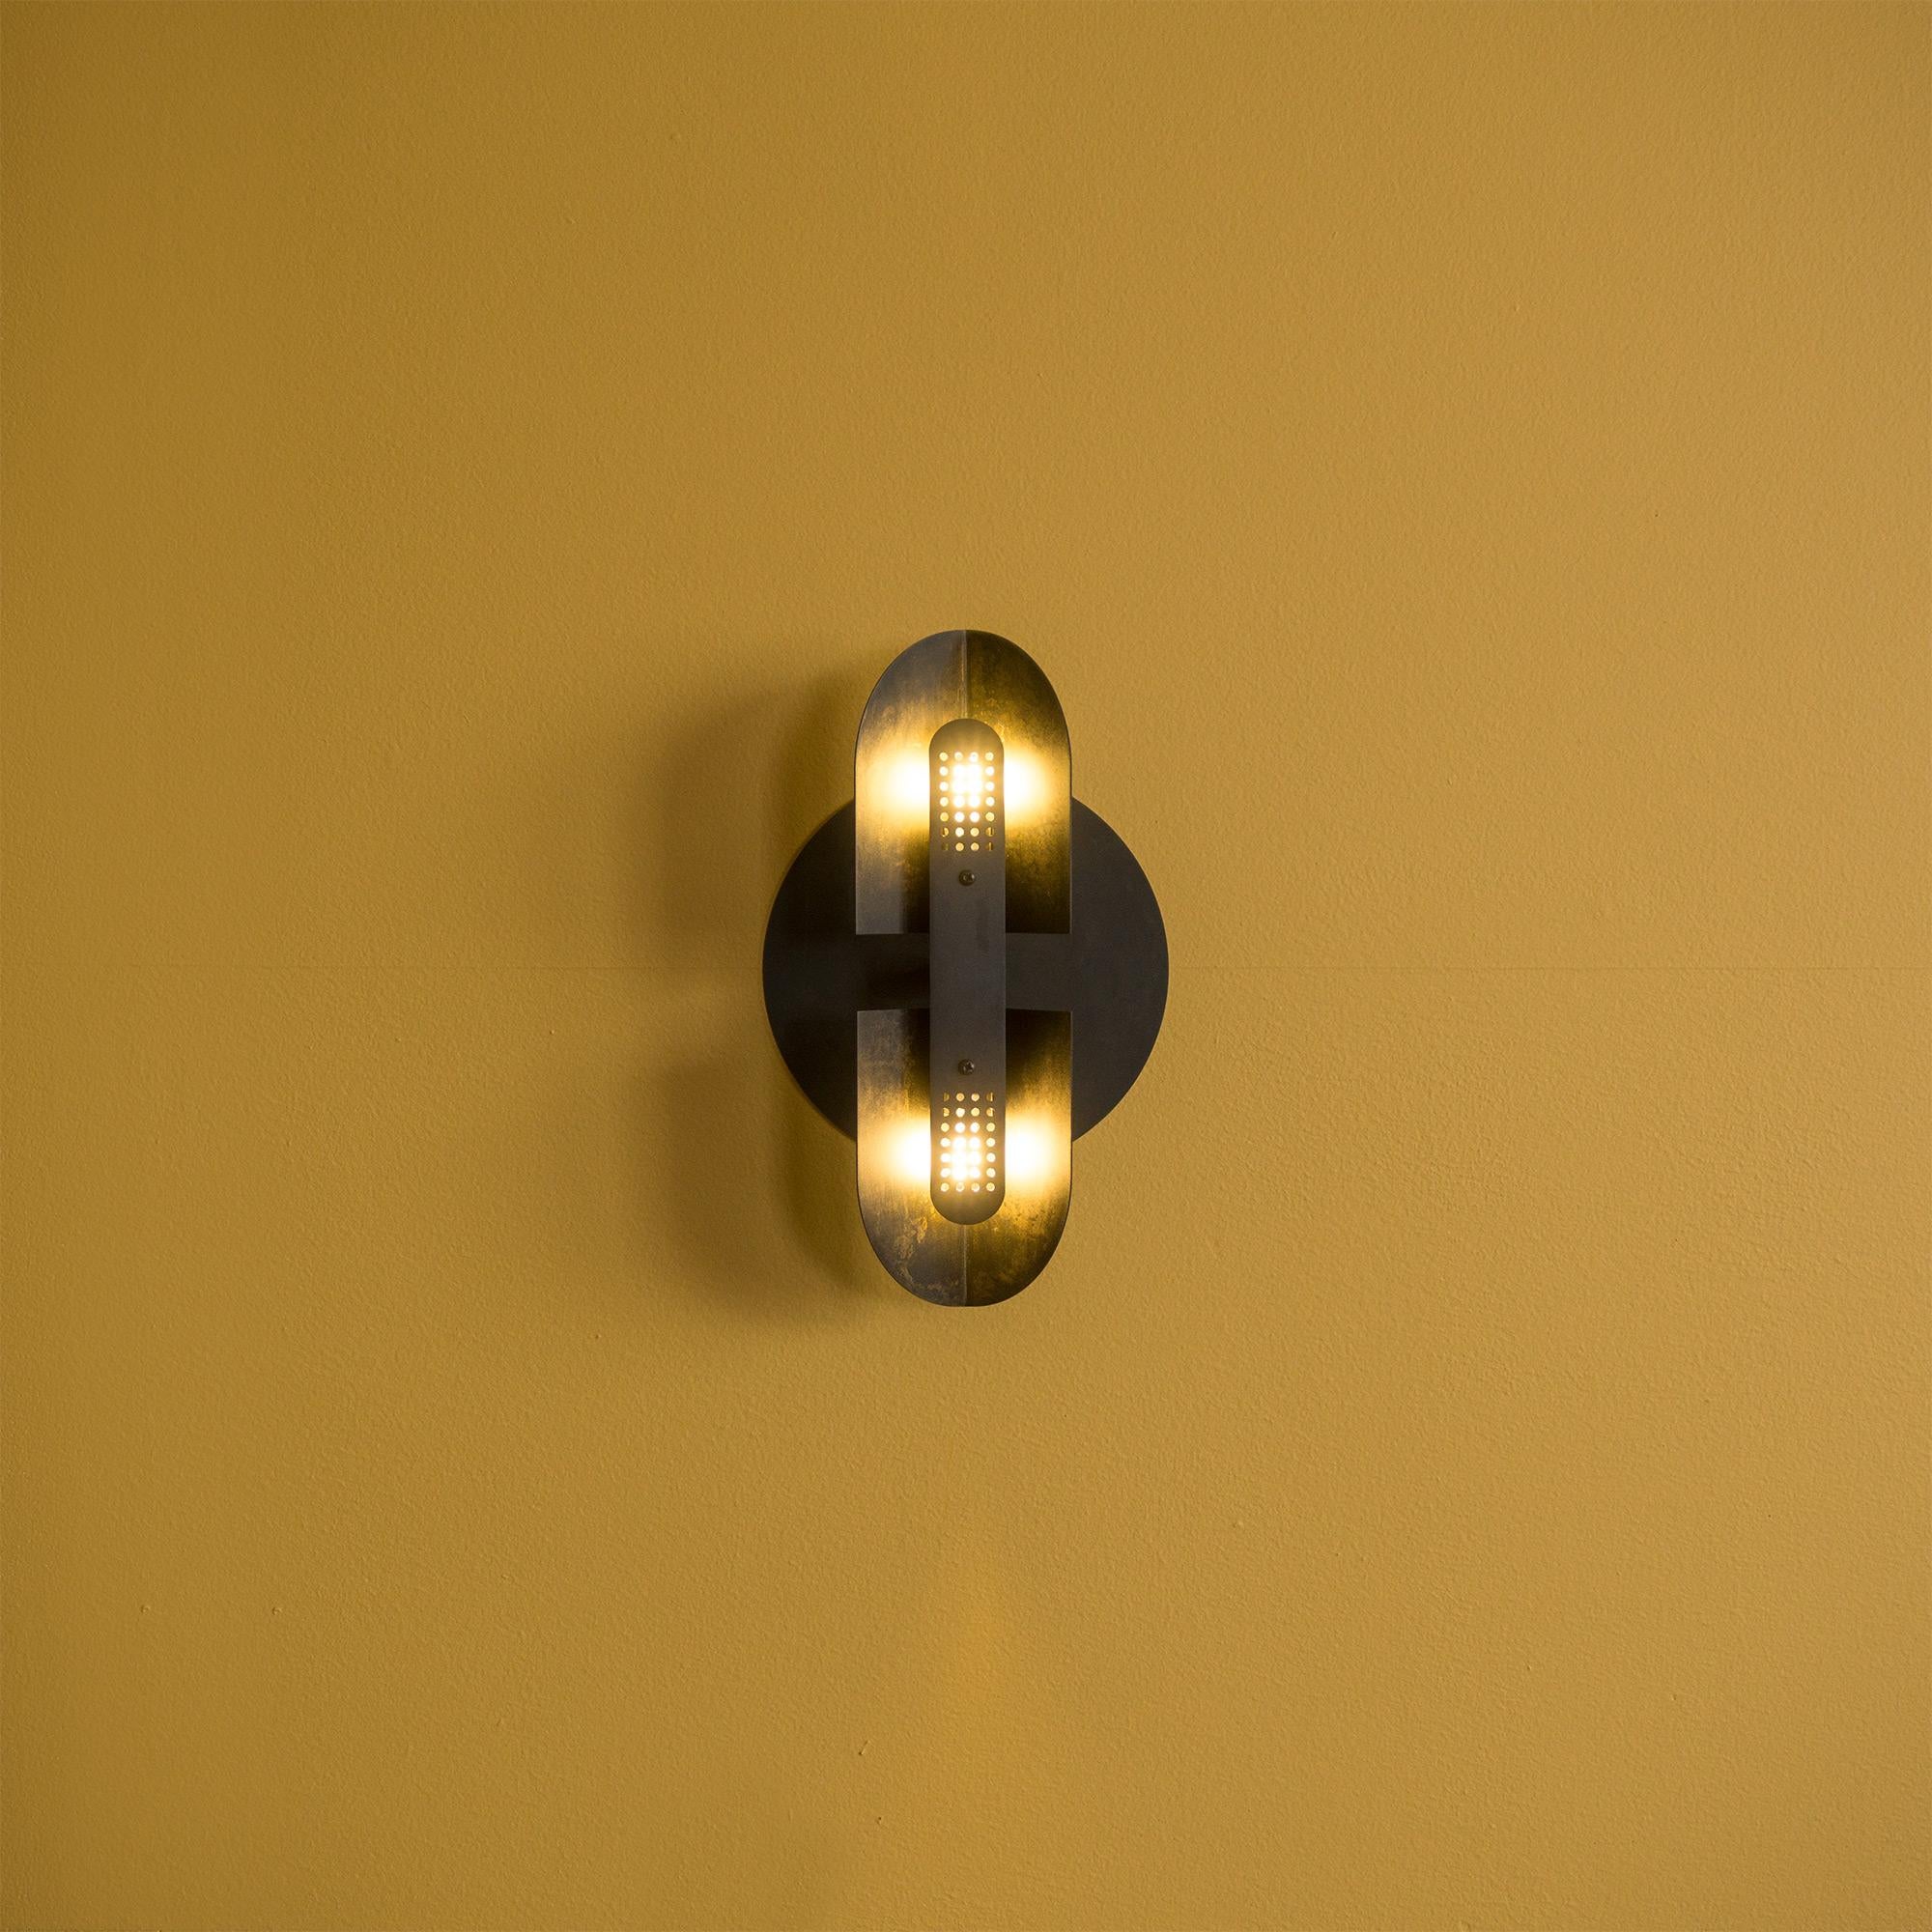 Patinated Fold Sconce in Perforated Black Patina by Simon Johns